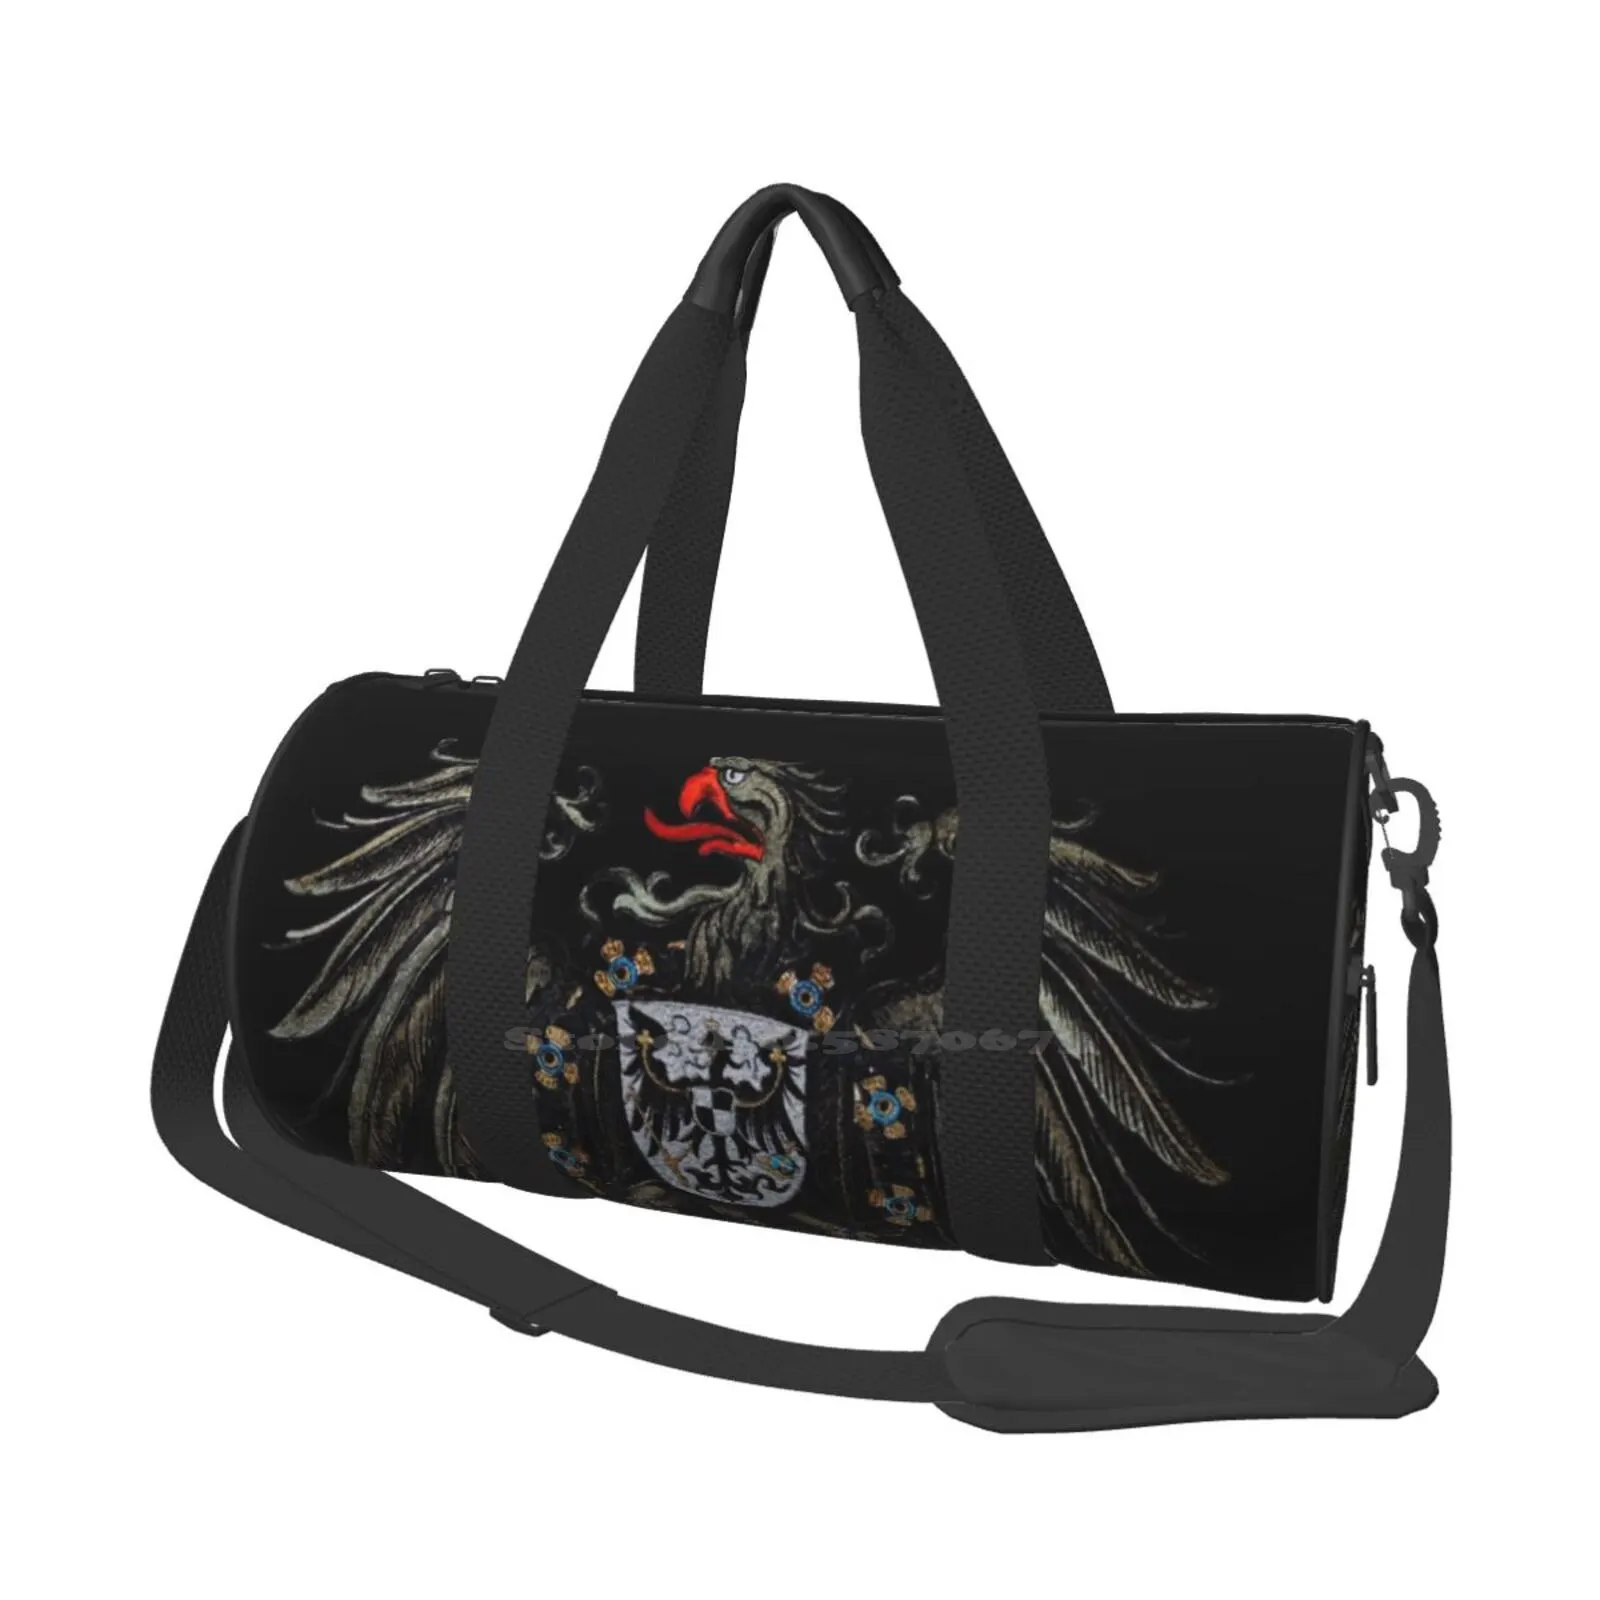 

German Imperial Eagle Shoulder Bag Casual Satchel For Sport Travel School German Germany Holy Roman Empire West Great Imperium